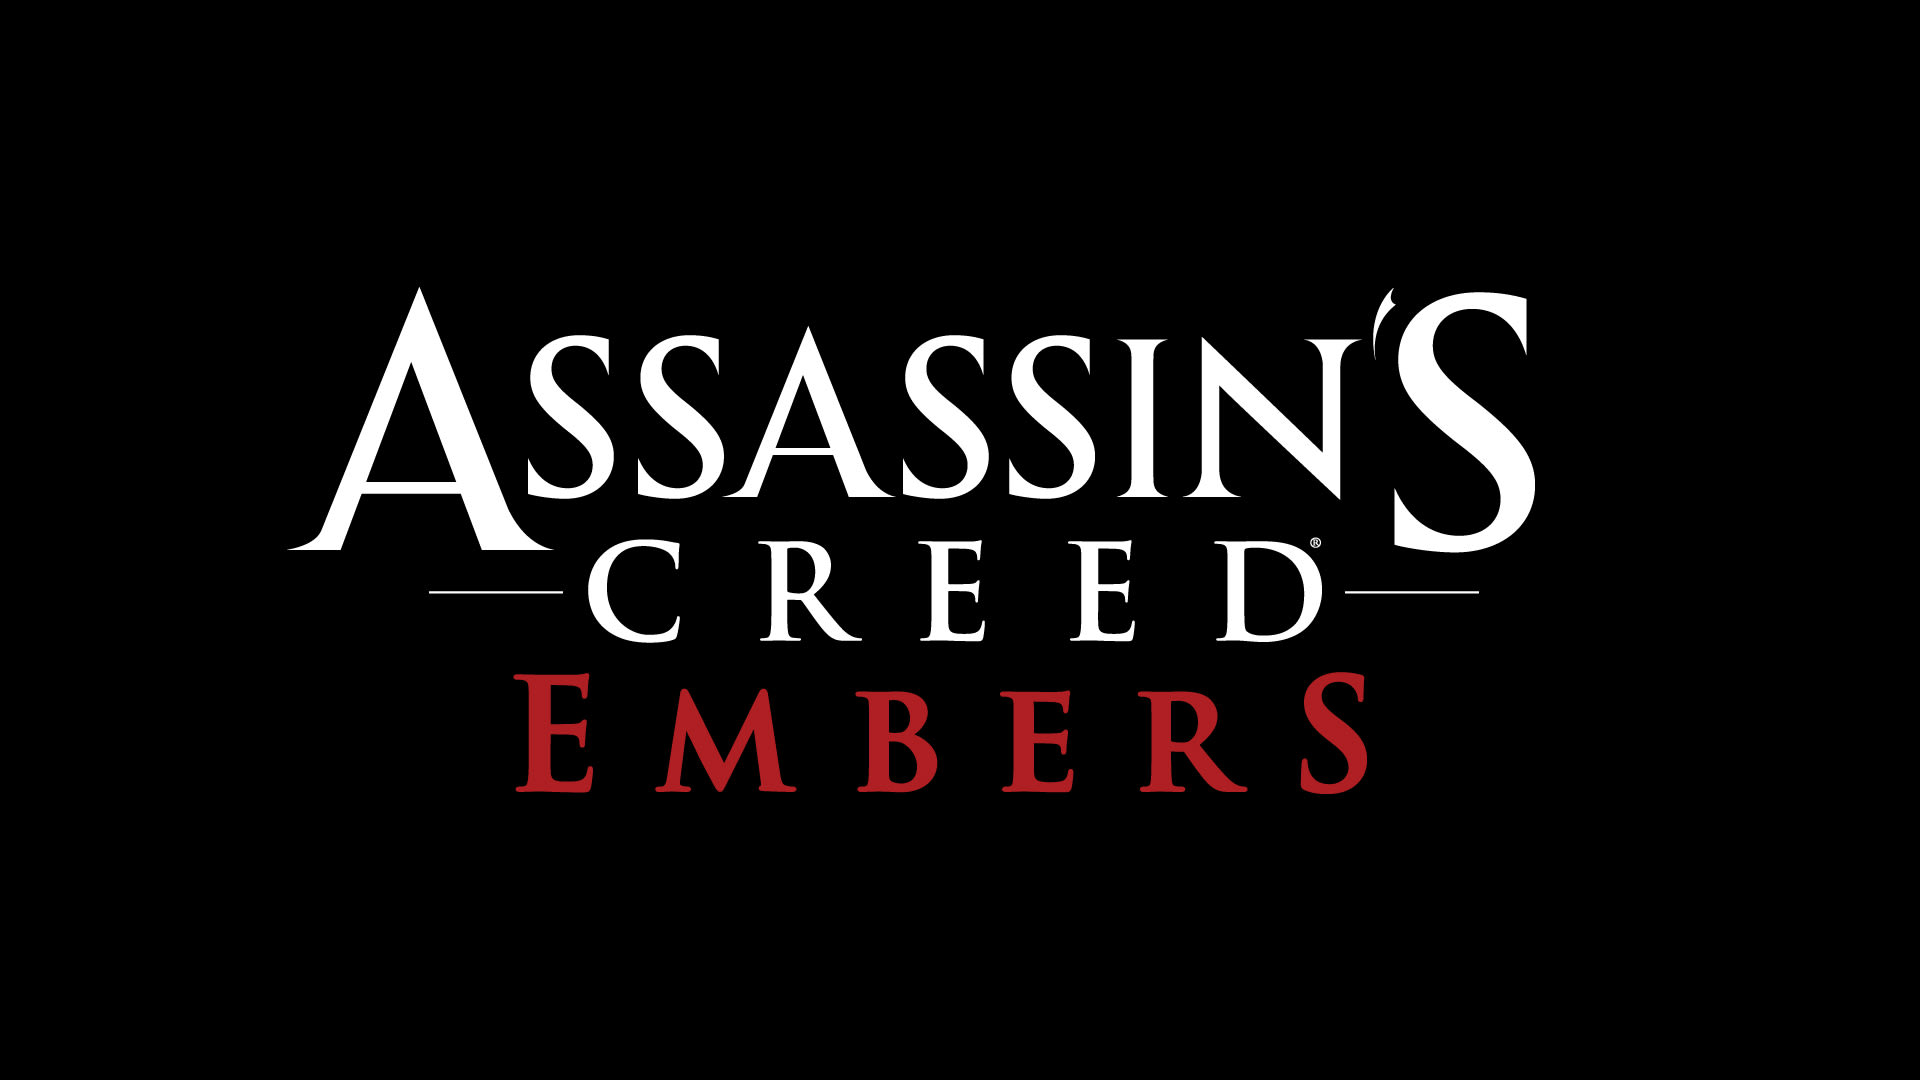 Assassin’s Creed Embers